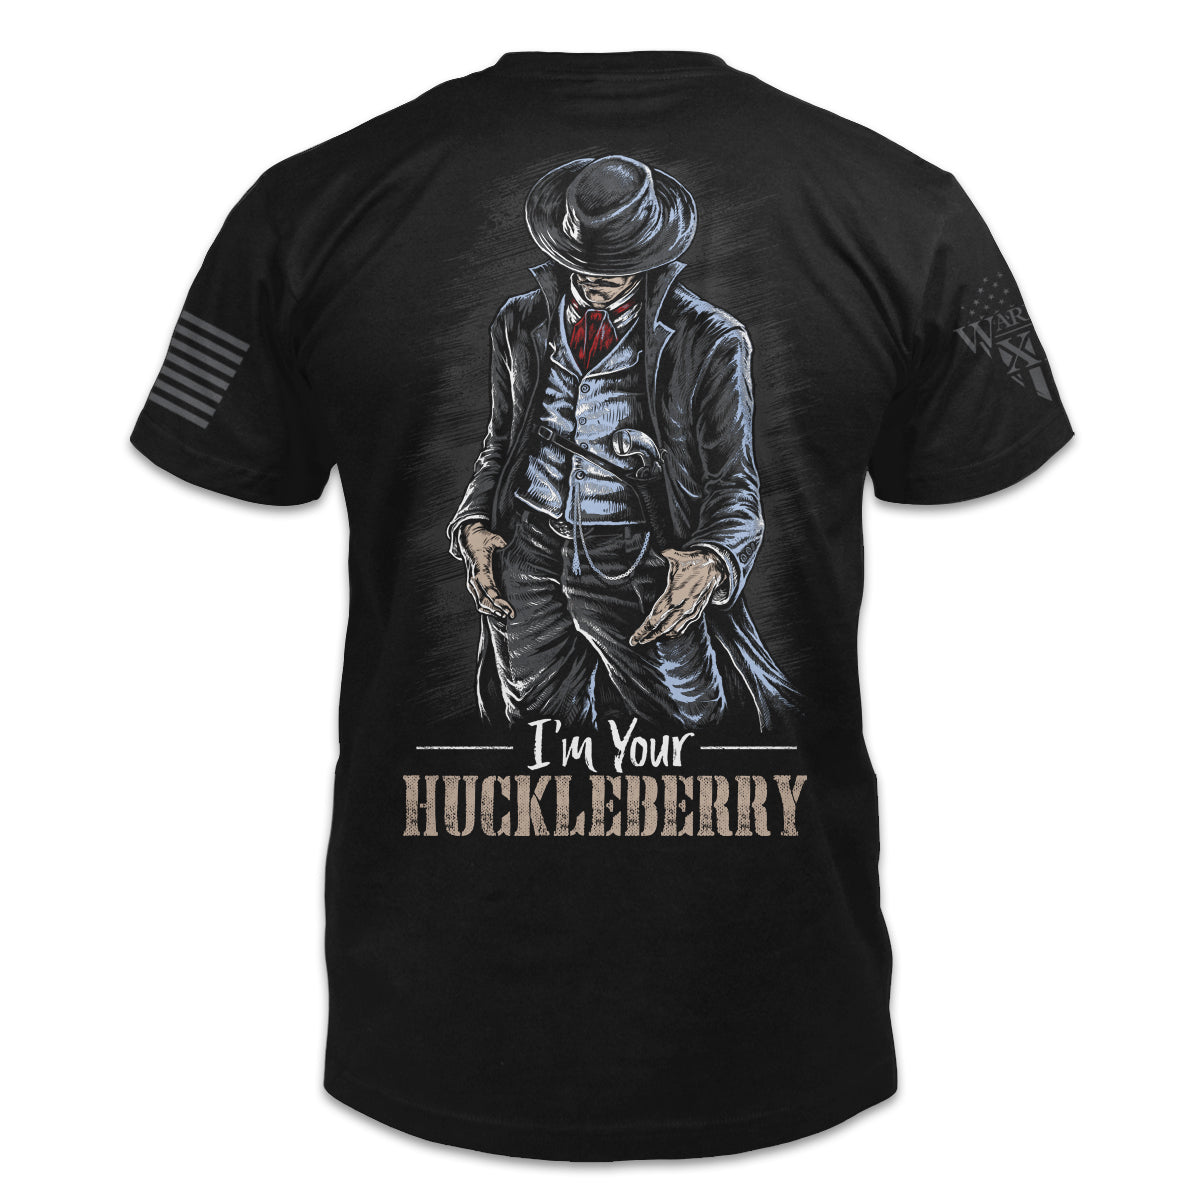 A black t-shirt with the words "I'm your Huckleberry" with a cowboy printed on the back of the shirt.